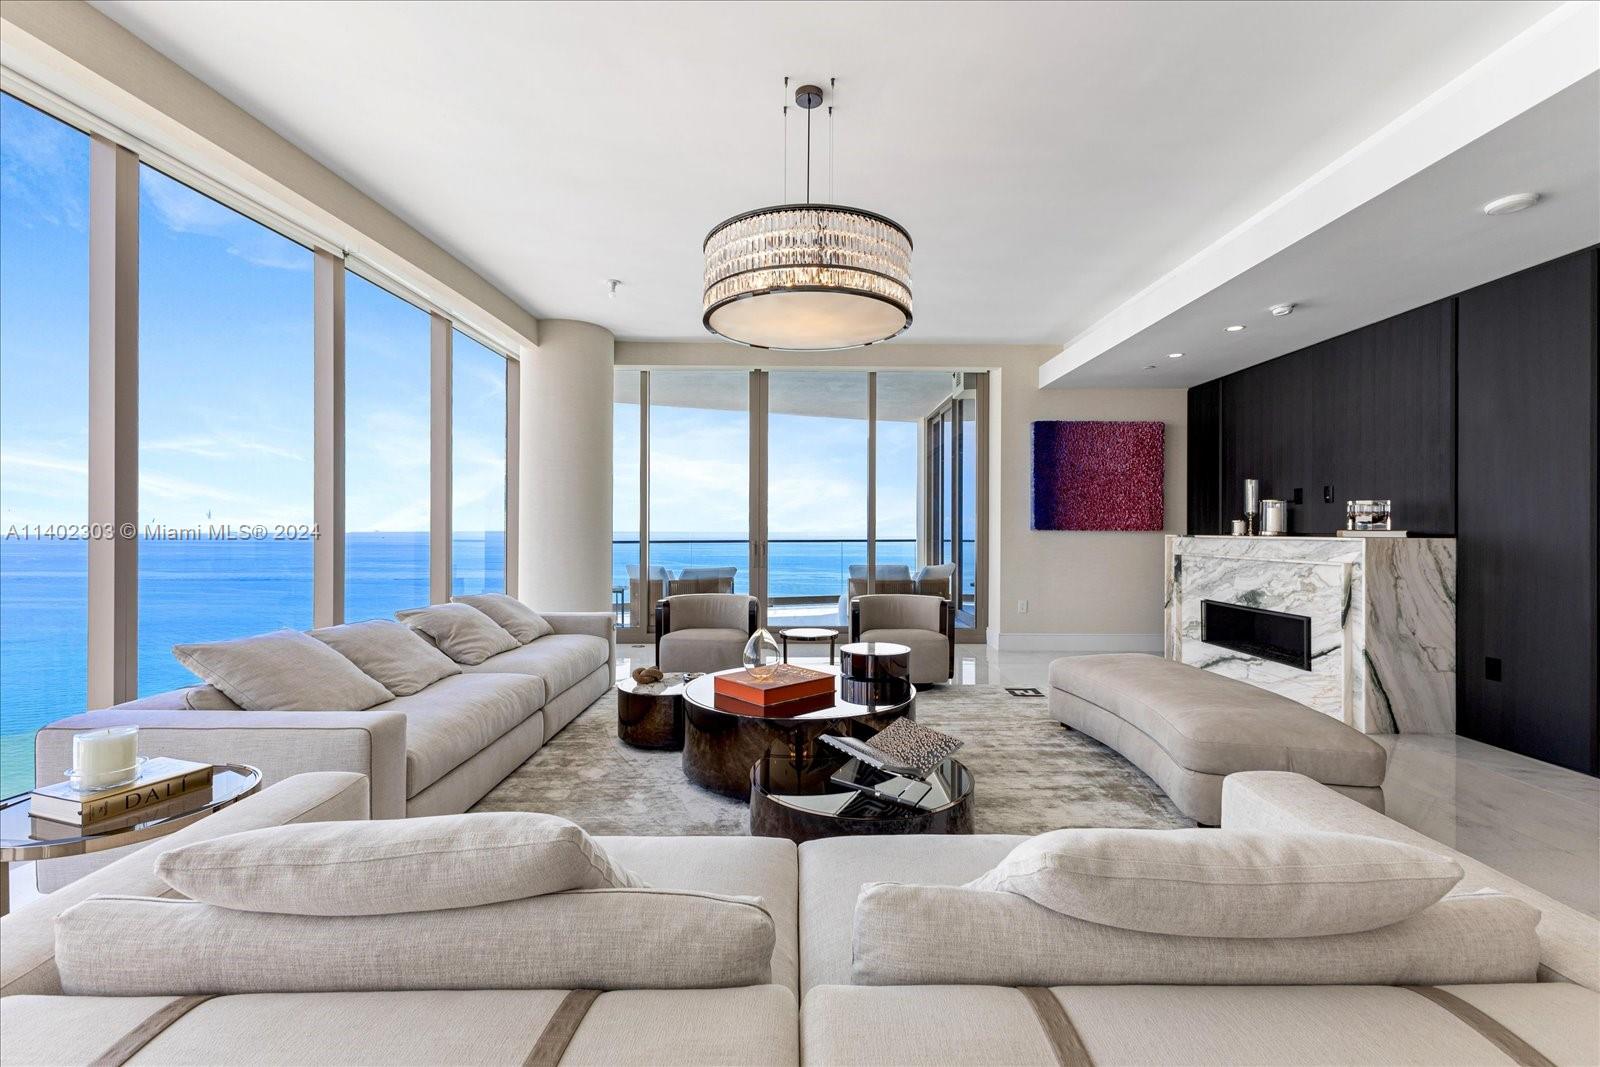 Property for Sale at 17975 Collins Ave 3002, Sunny Isles Beach, Miami-Dade County, Florida - Bedrooms: 4 
Bathrooms: 6  - $11,200,000